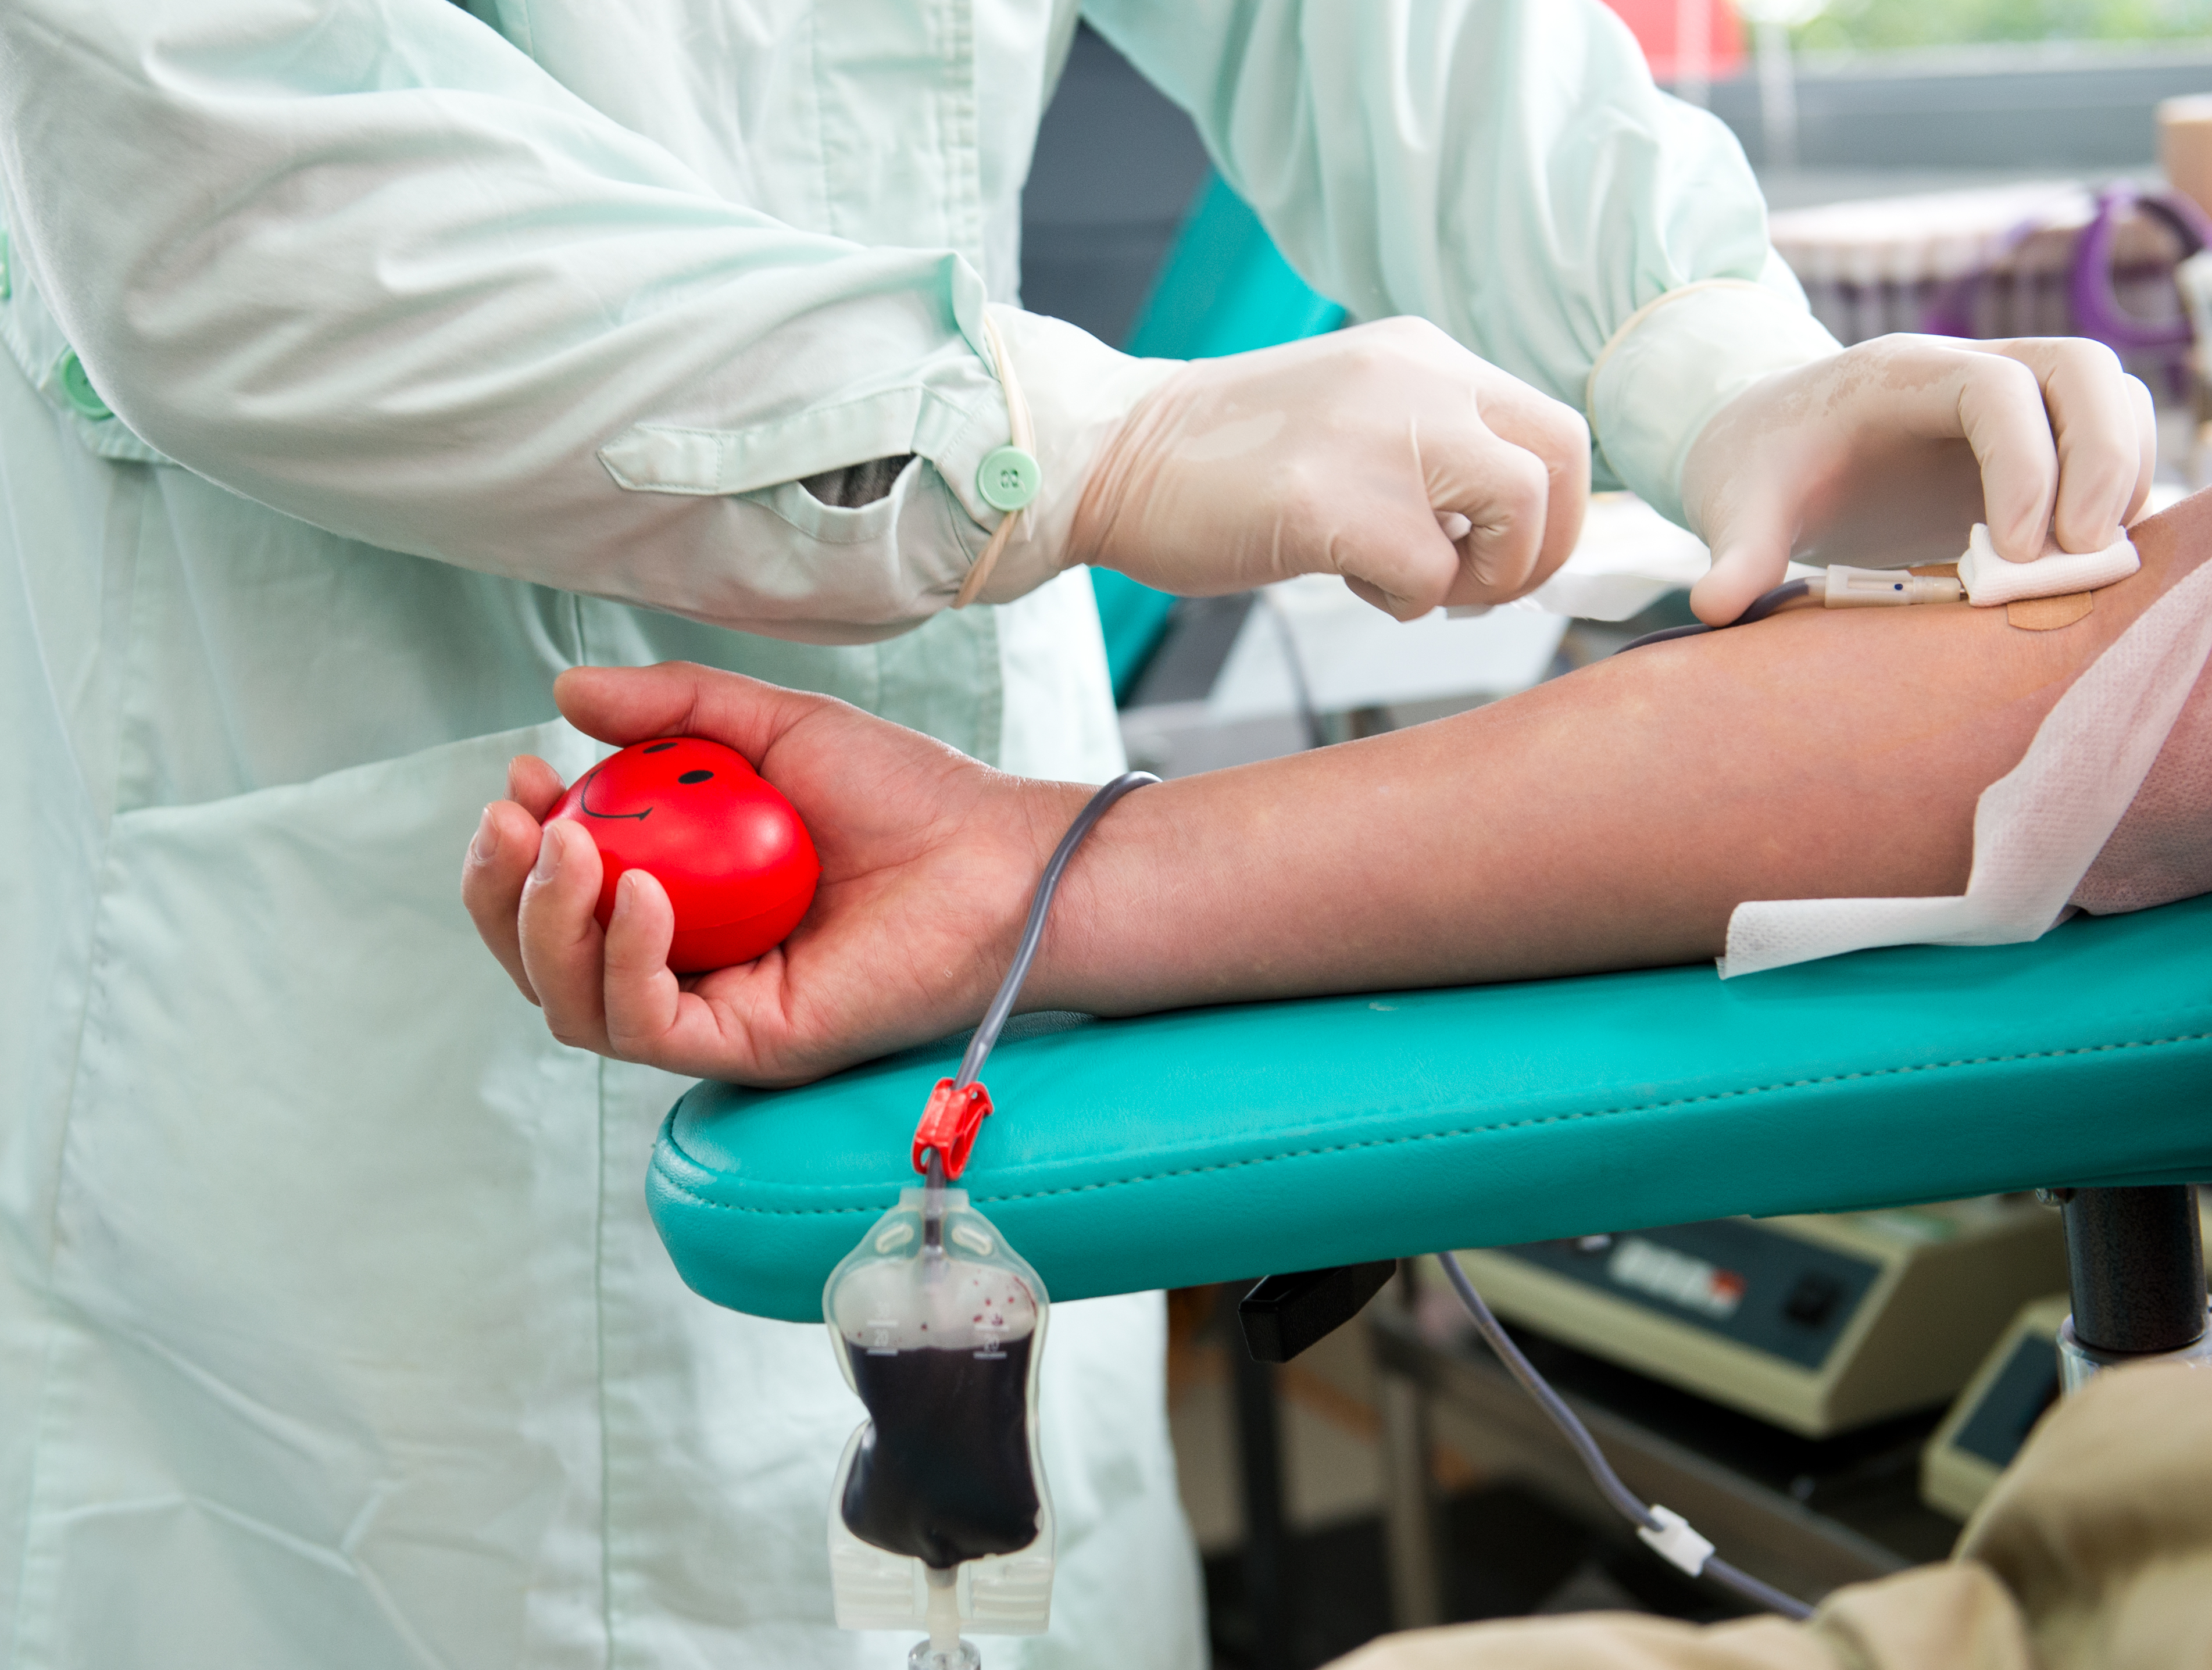 can gay men donate blood in nyc